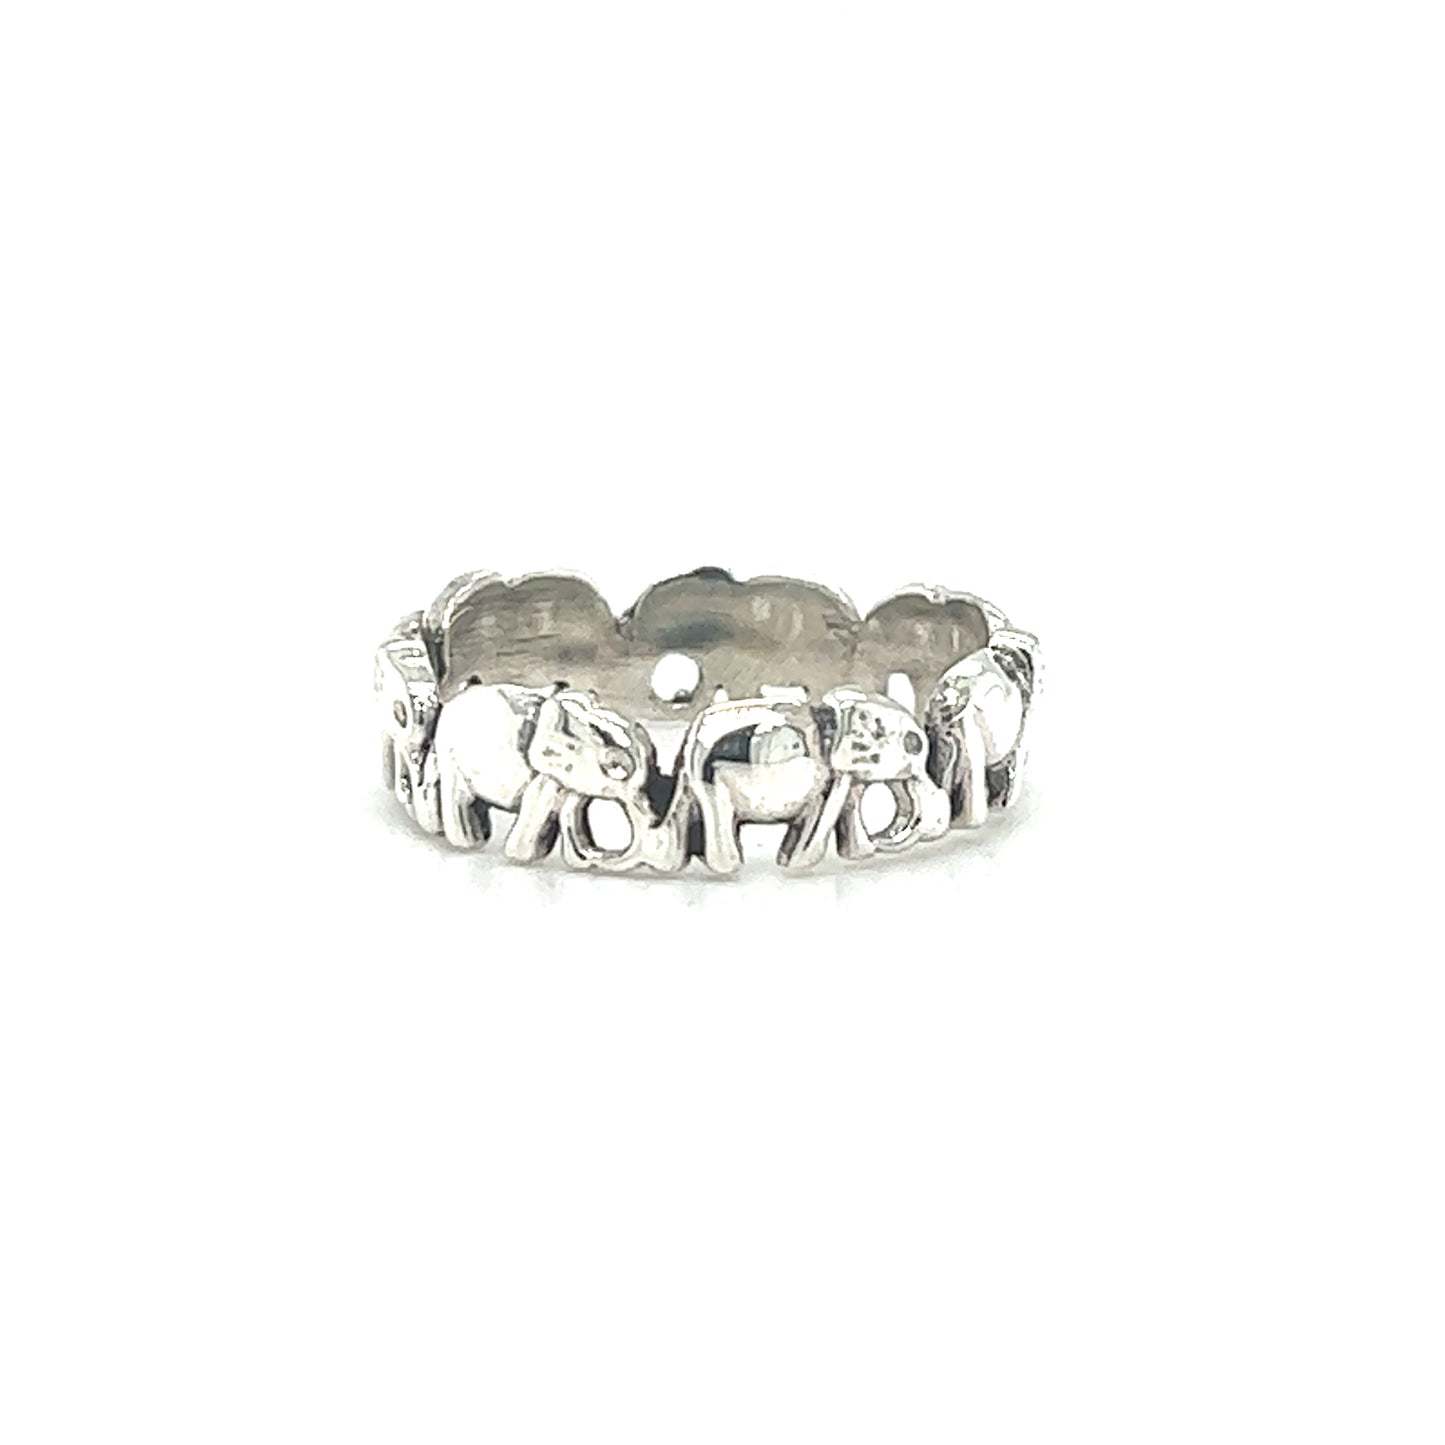 A stunning Charming Elephant Band from Super Silver symbolizing family bonds and unity.